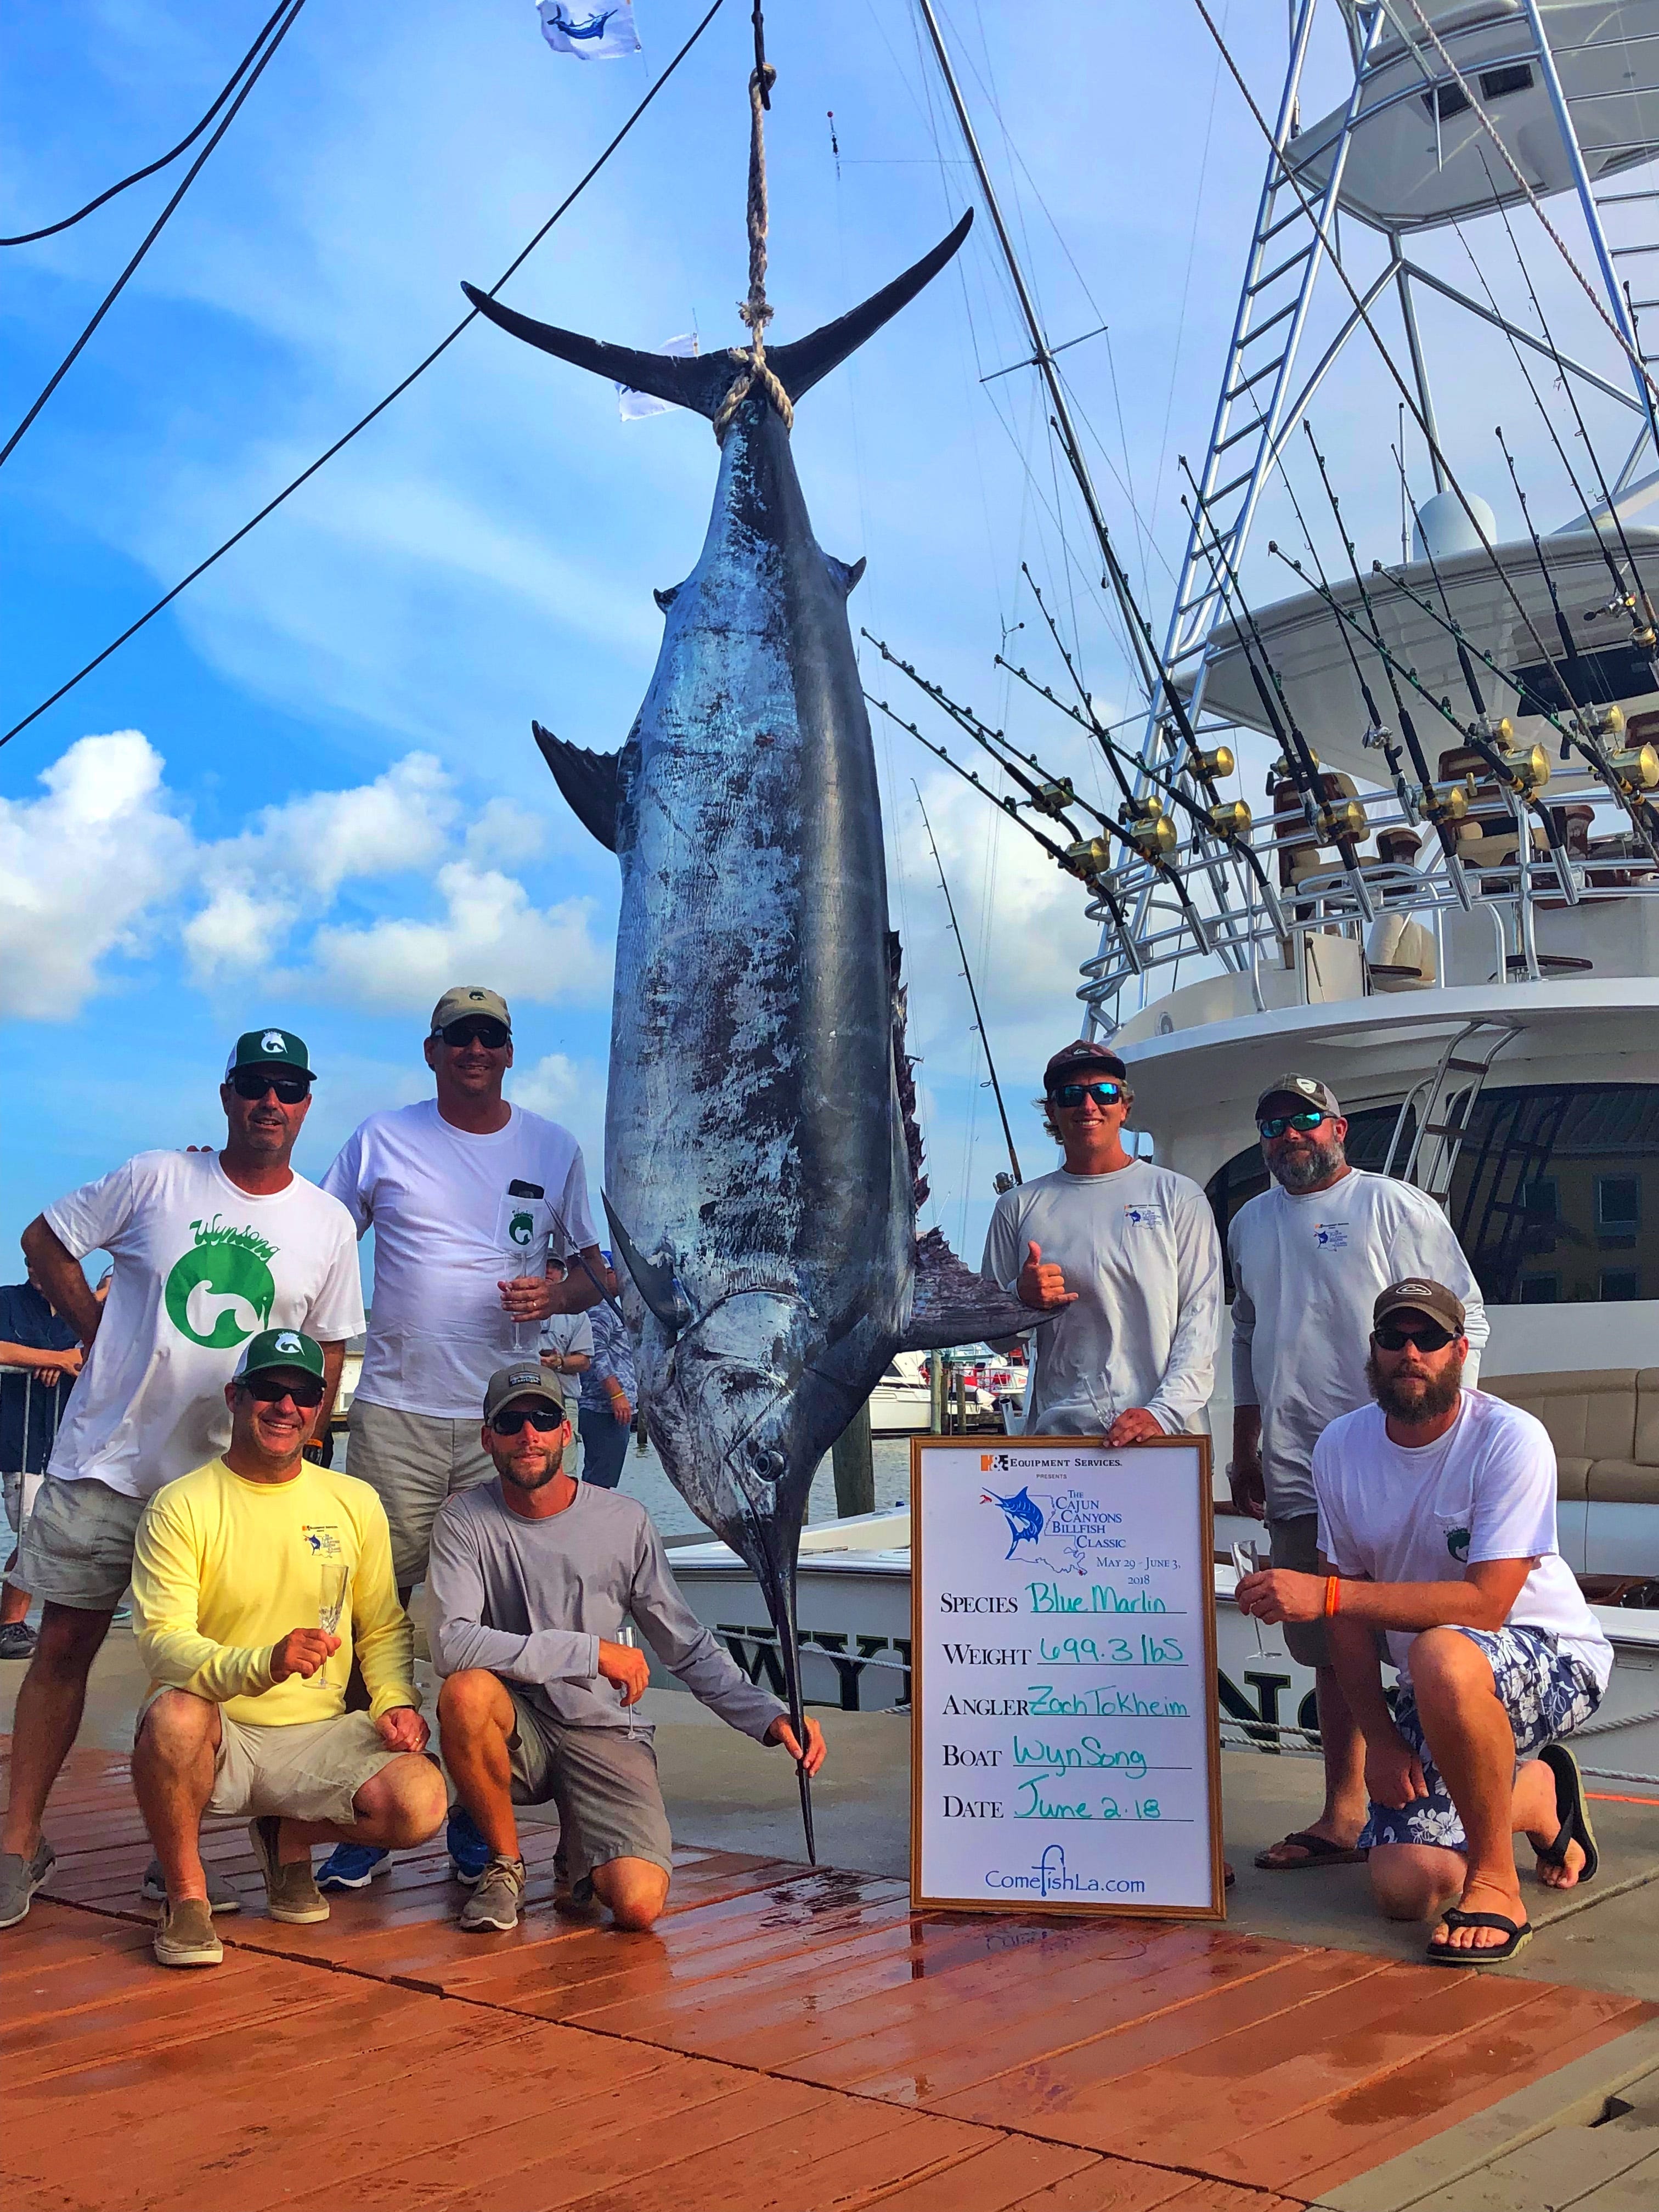 Capt. Allen Staples and Capt. Caleb Brown aboard the Wynsong, along with anglers Zach Tokheim, Ham Poyner, Pickett Reese, Chris Sheppard and Will Wilson, took first place in the Cajun Canyons Billfish Classic in Louisiana with this 669.3-pound blue marlin. Tokheim, standing just to the right of the fish, was the angler on the rod. [CONTRIBUTED PHOTO]